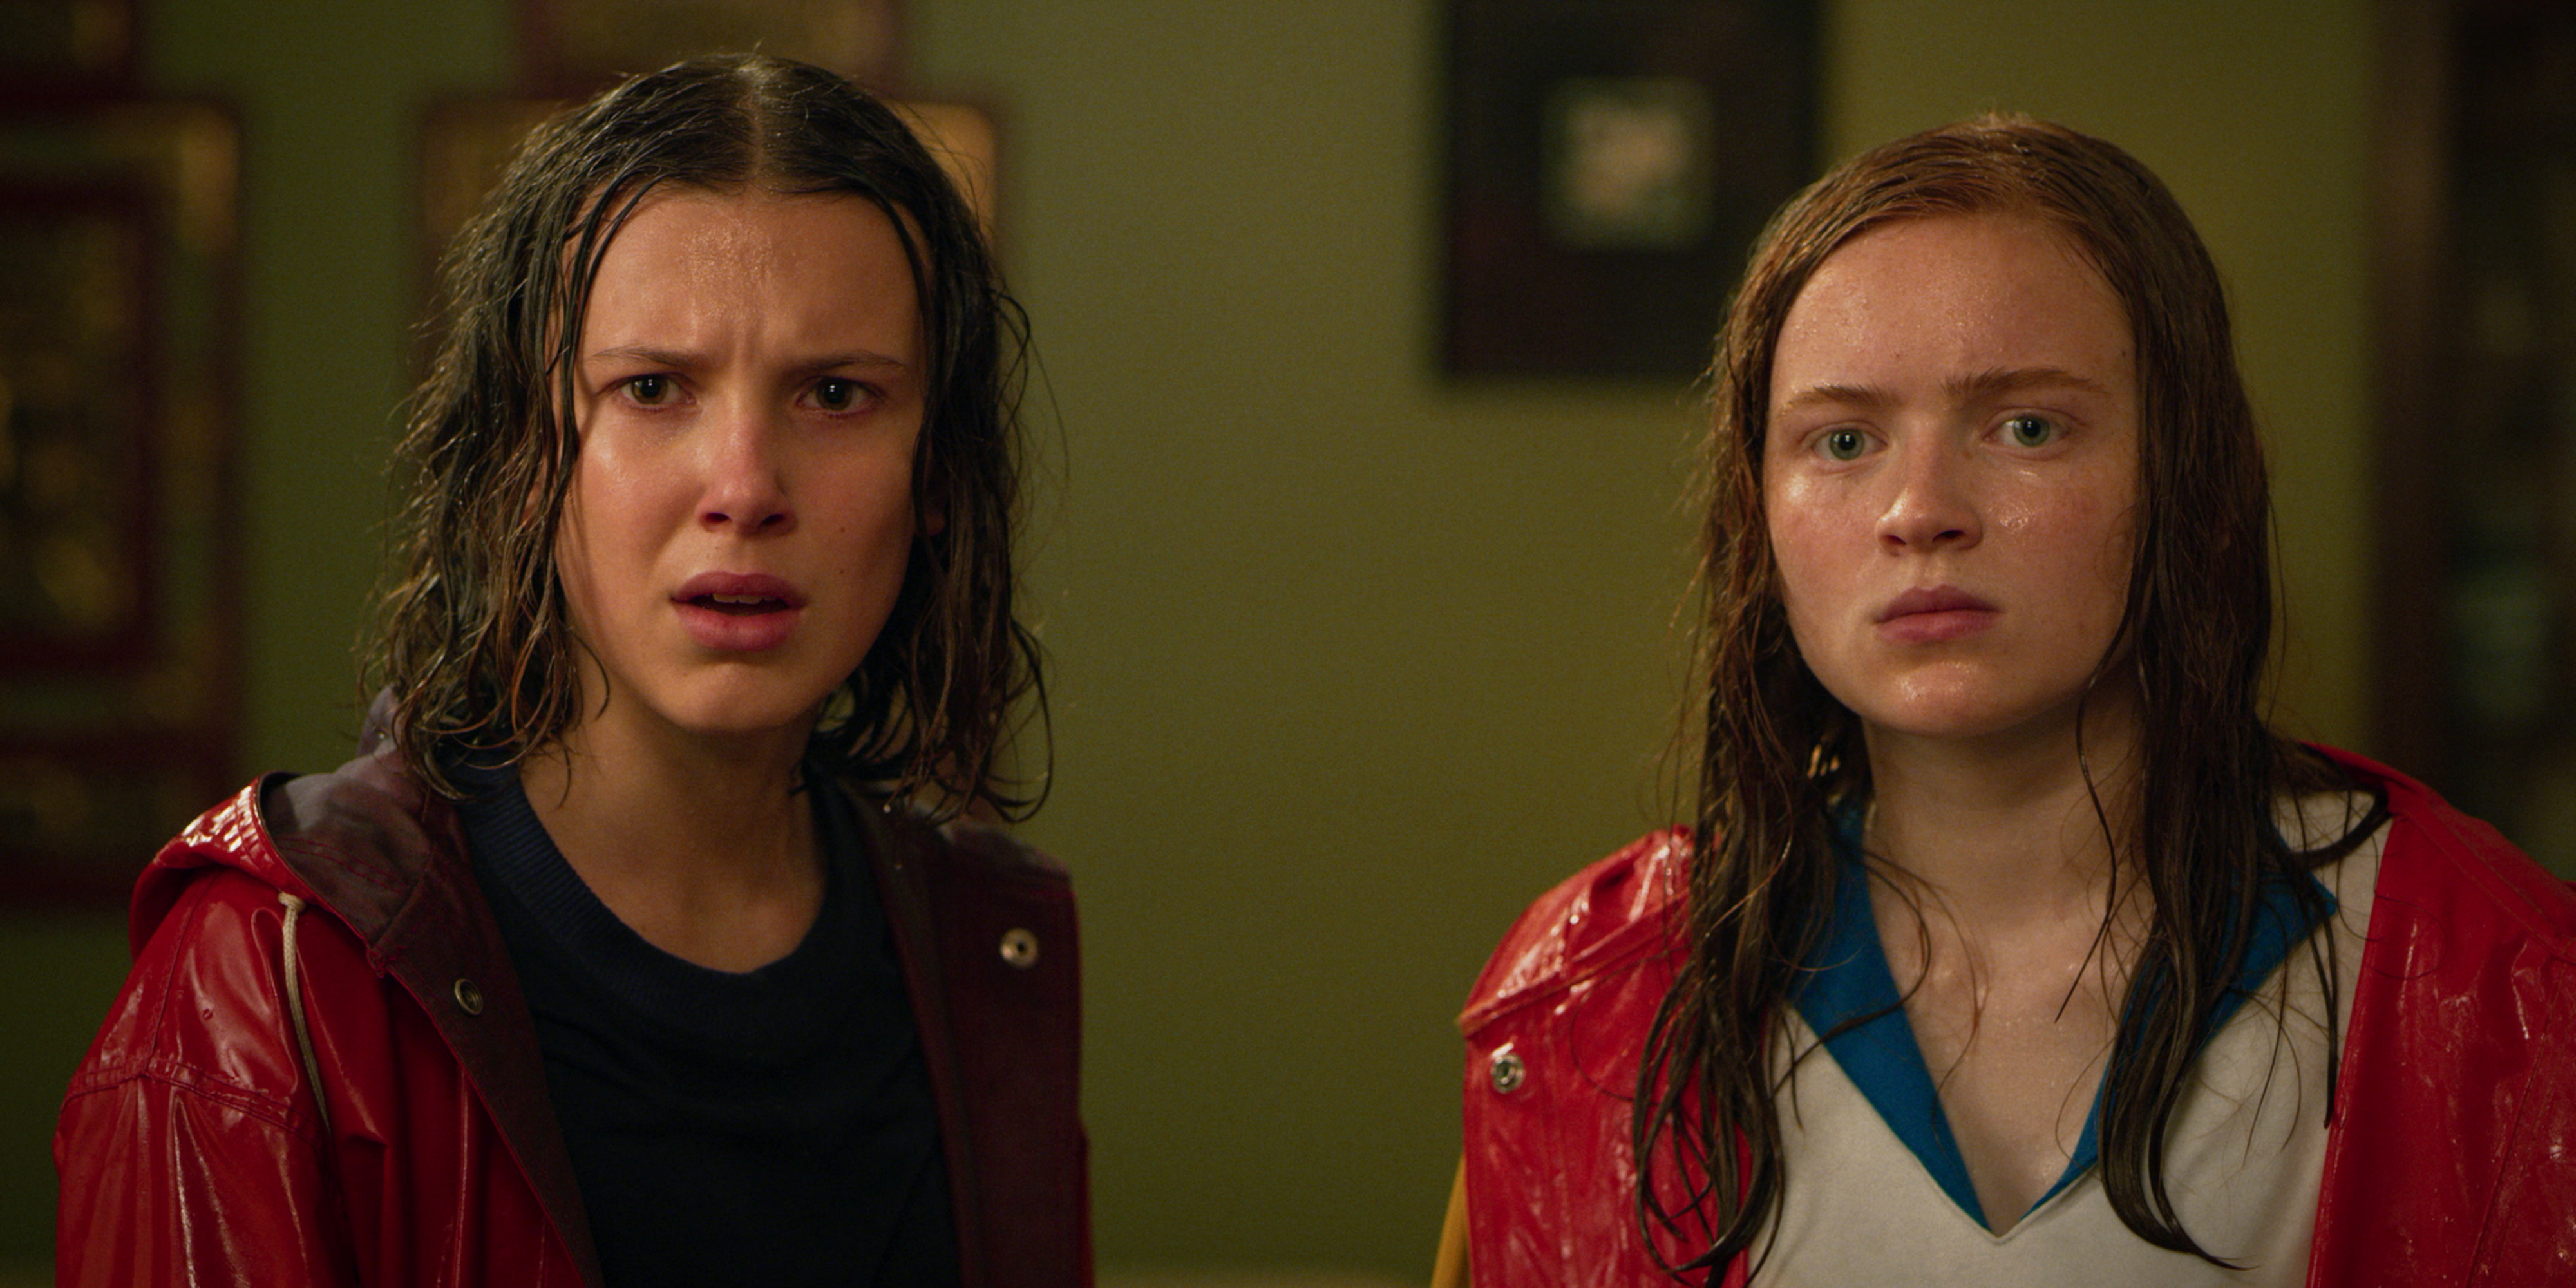 Millie Bobby Brown and Sadie Sink as Eleven and Max in a production still from 'Stranger Things' Season 3.